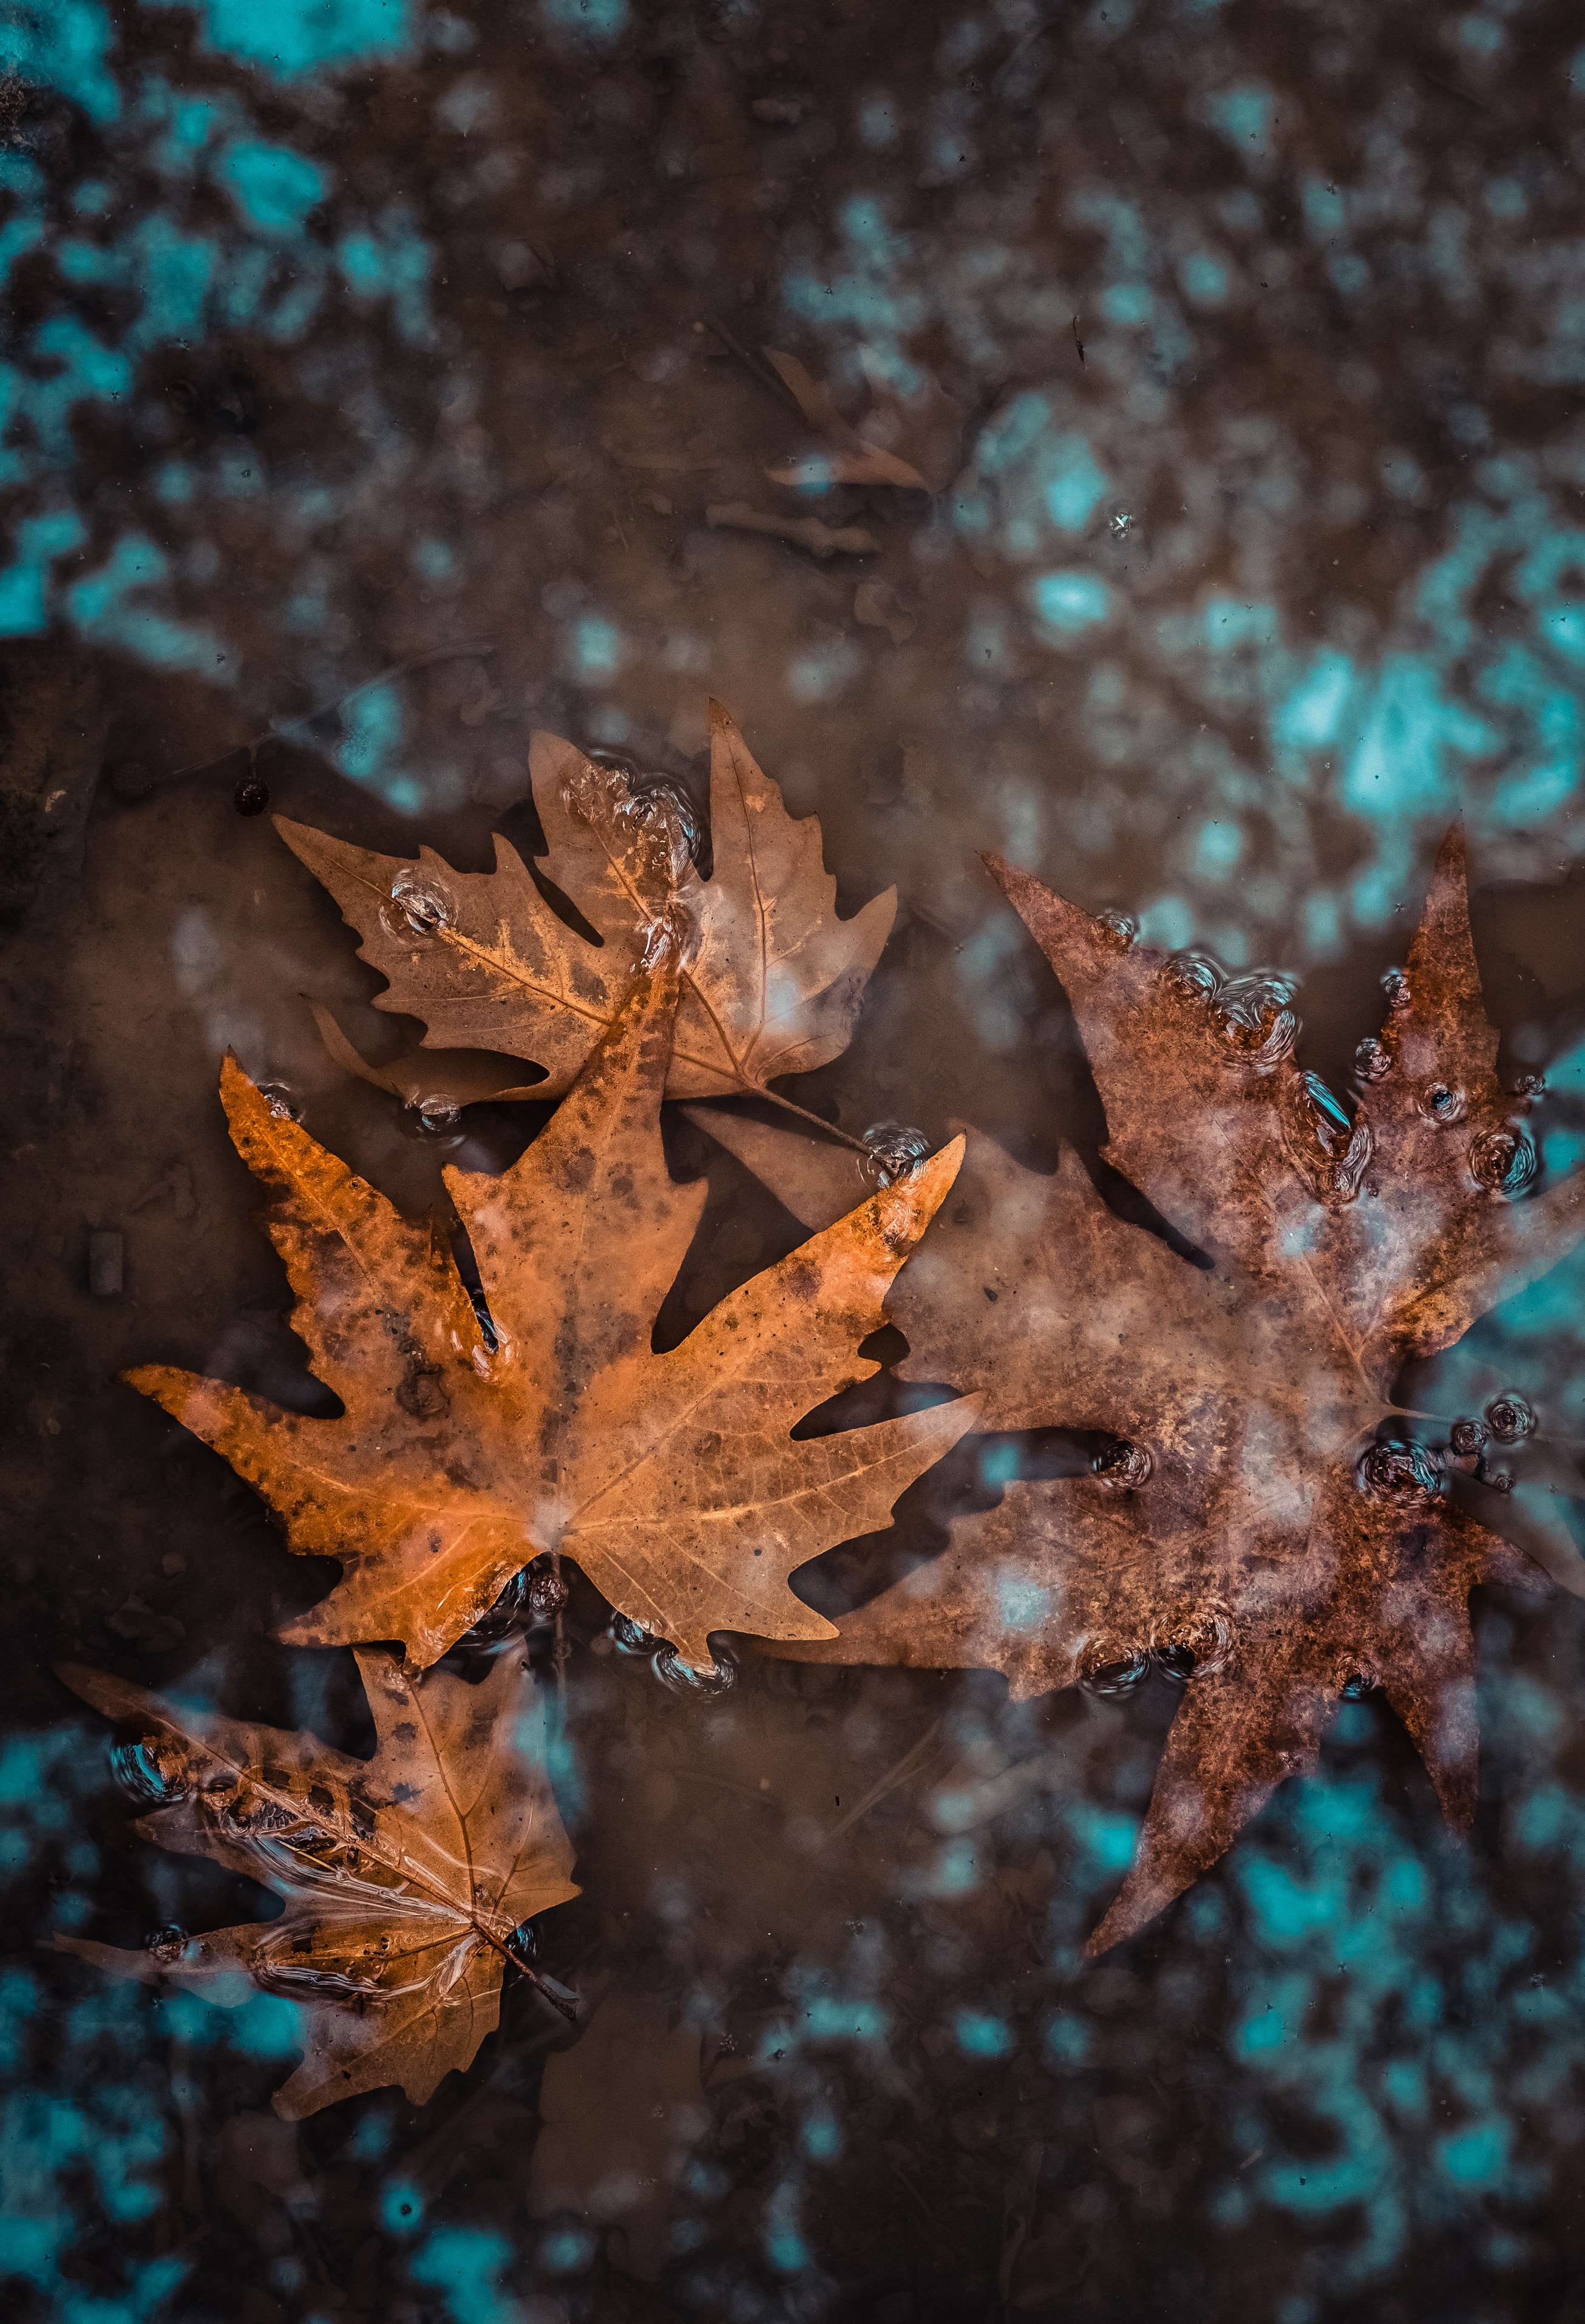 129772 Screensavers and Wallpapers Fallen for phone. Download nature, water, autumn, leaves, wet, fallen pictures for free